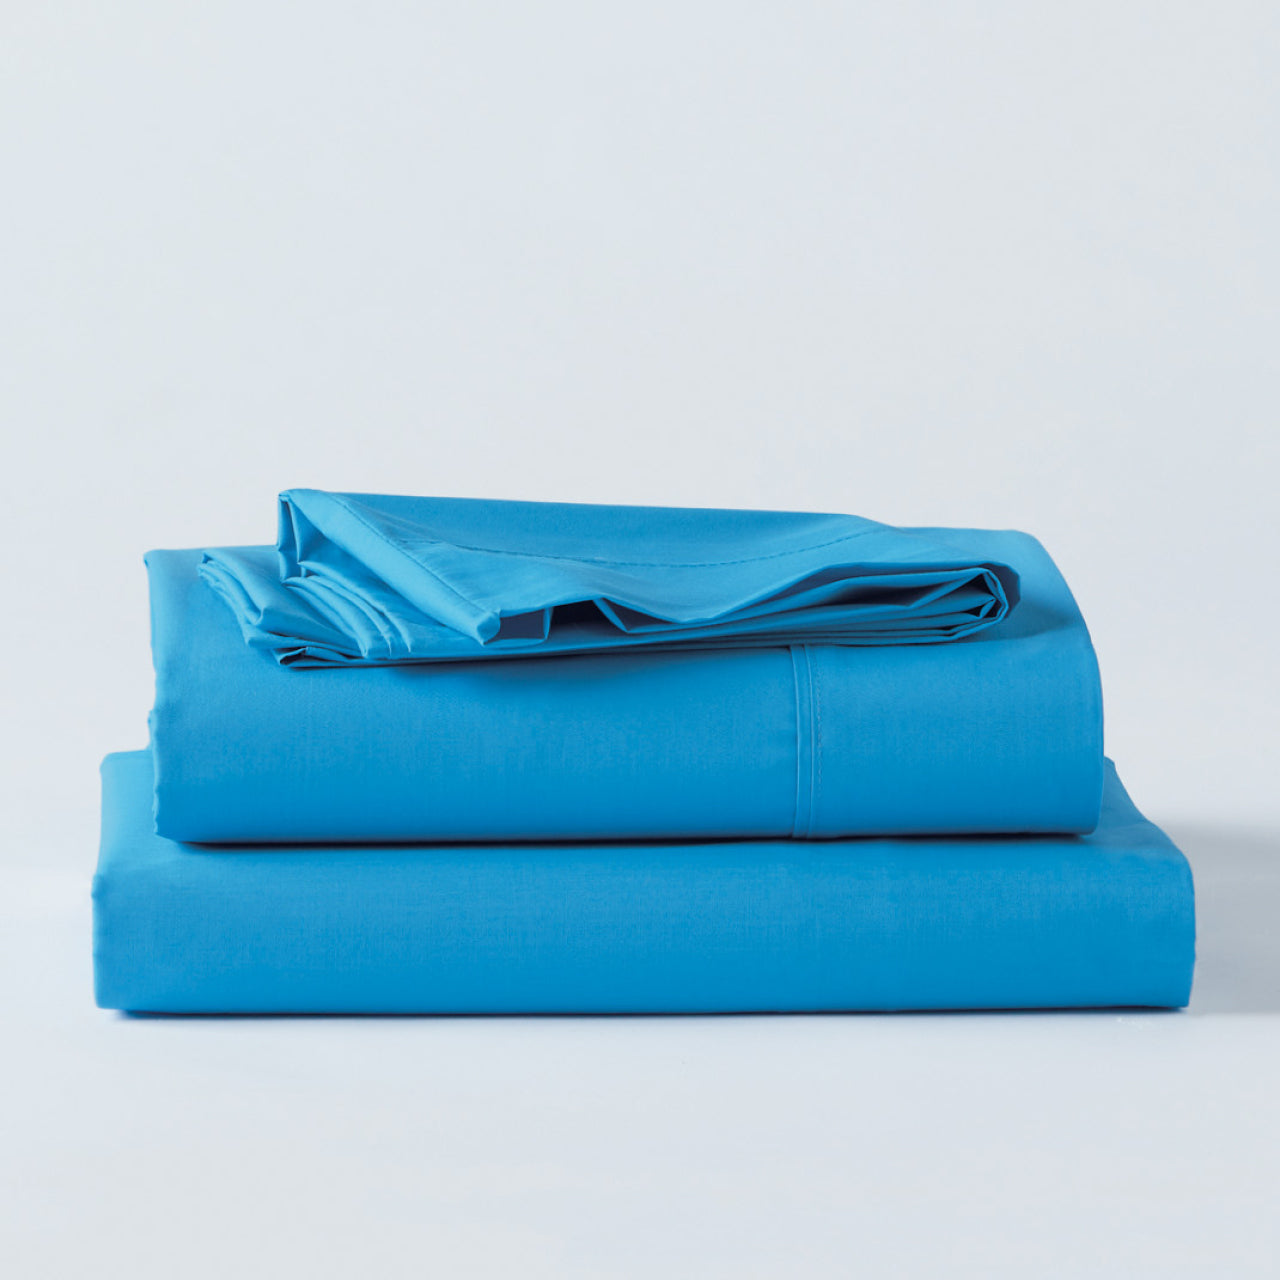 Premium Percale Ocean Sheets folded up on floor